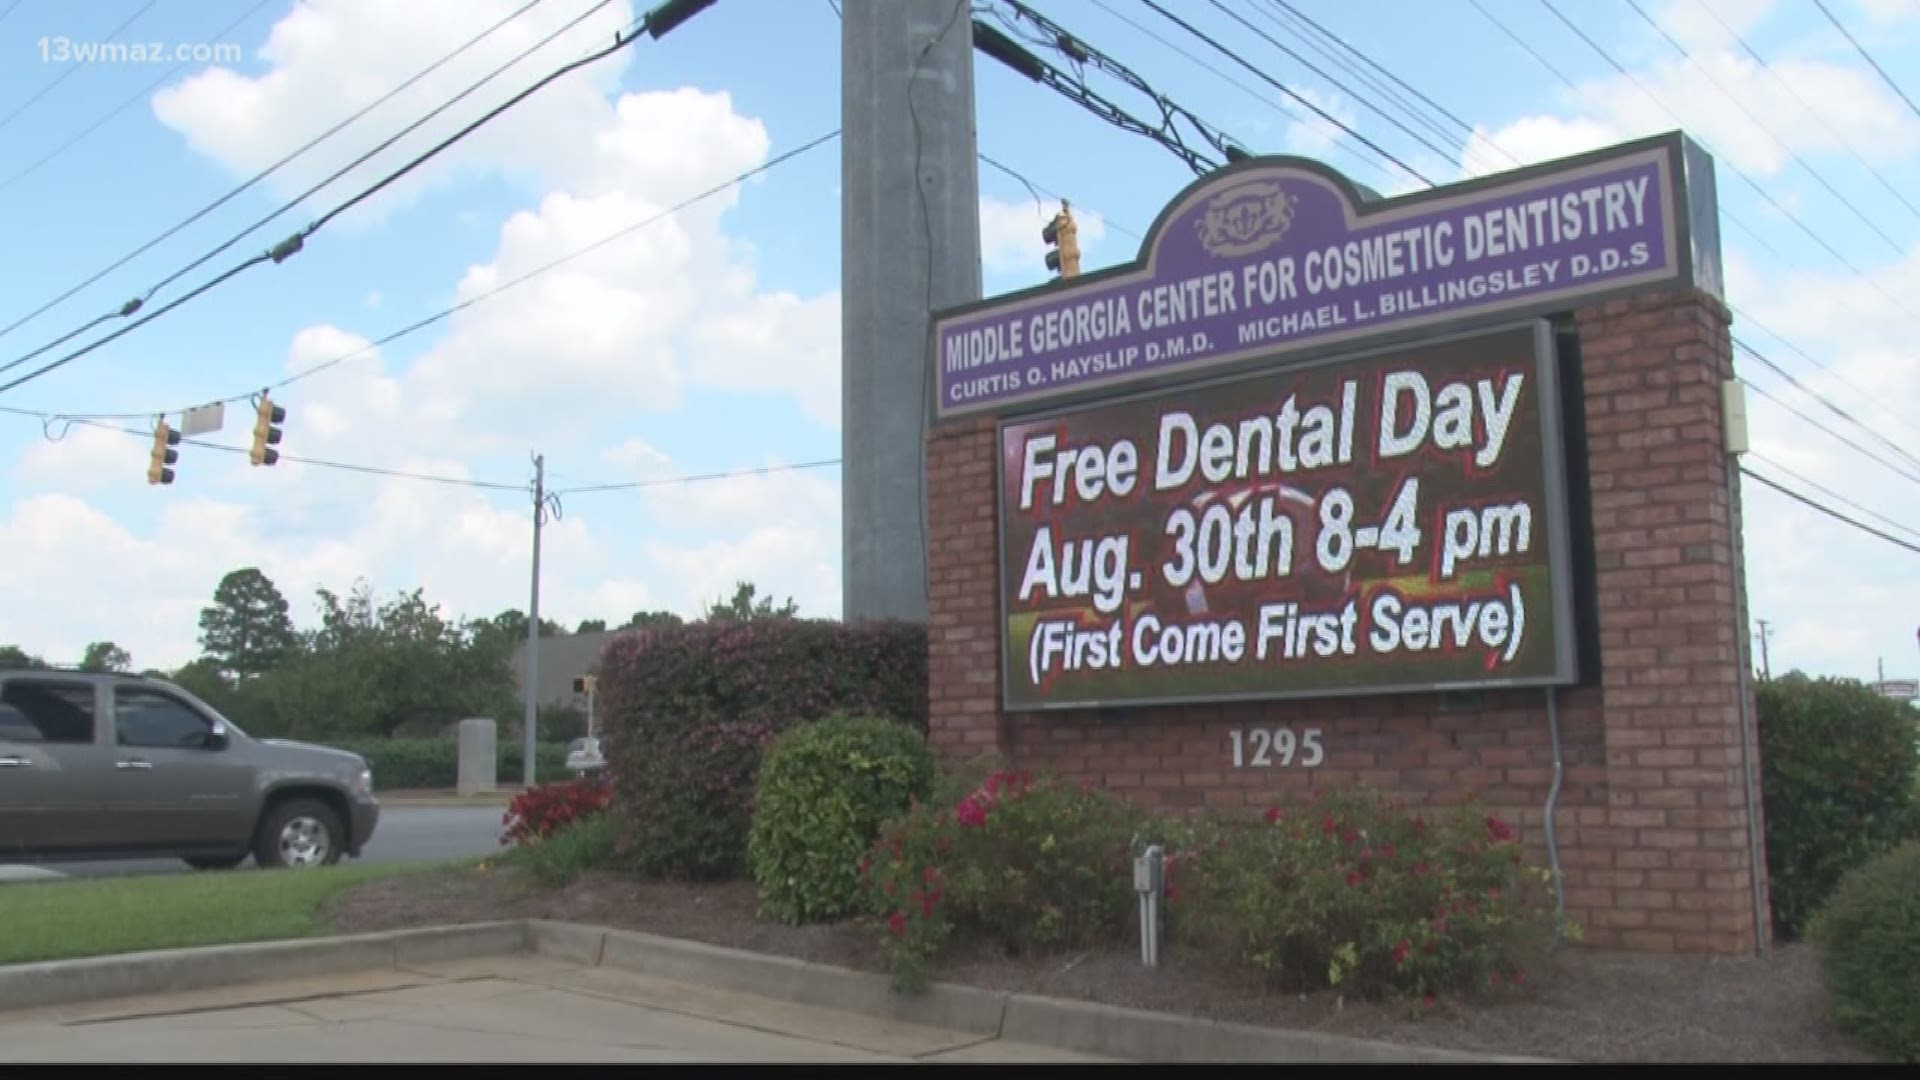 Dentist office offering free dental services